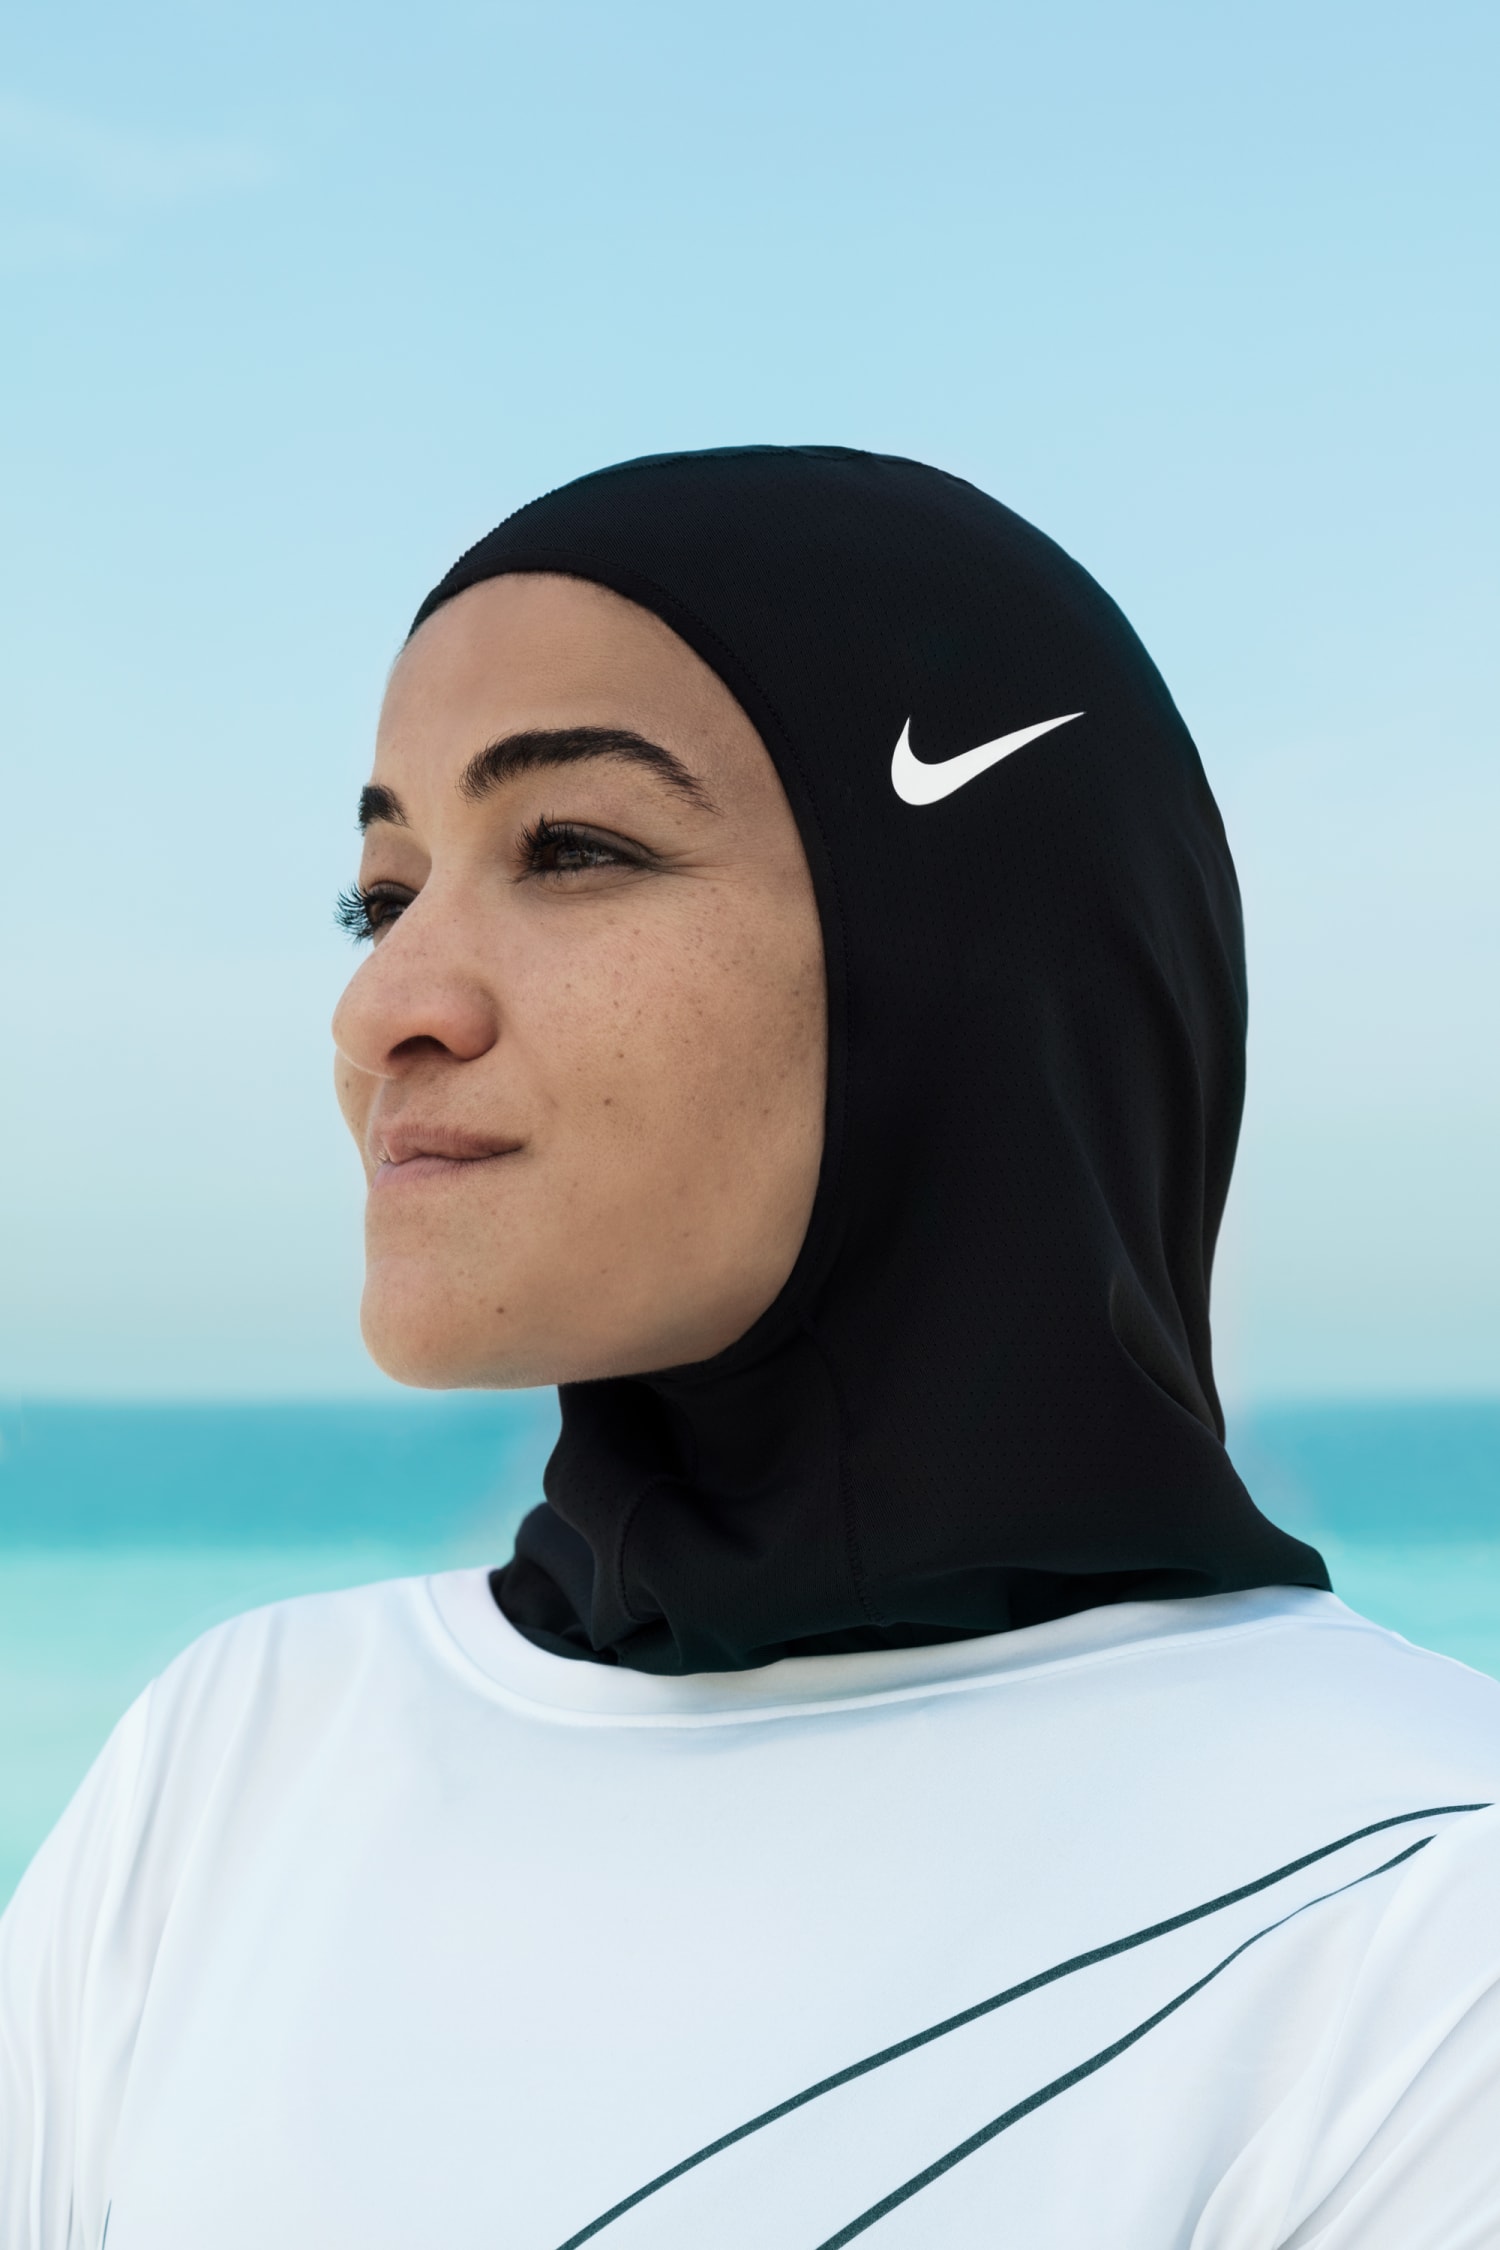 Nike Announces 'Pro in into Modest Market